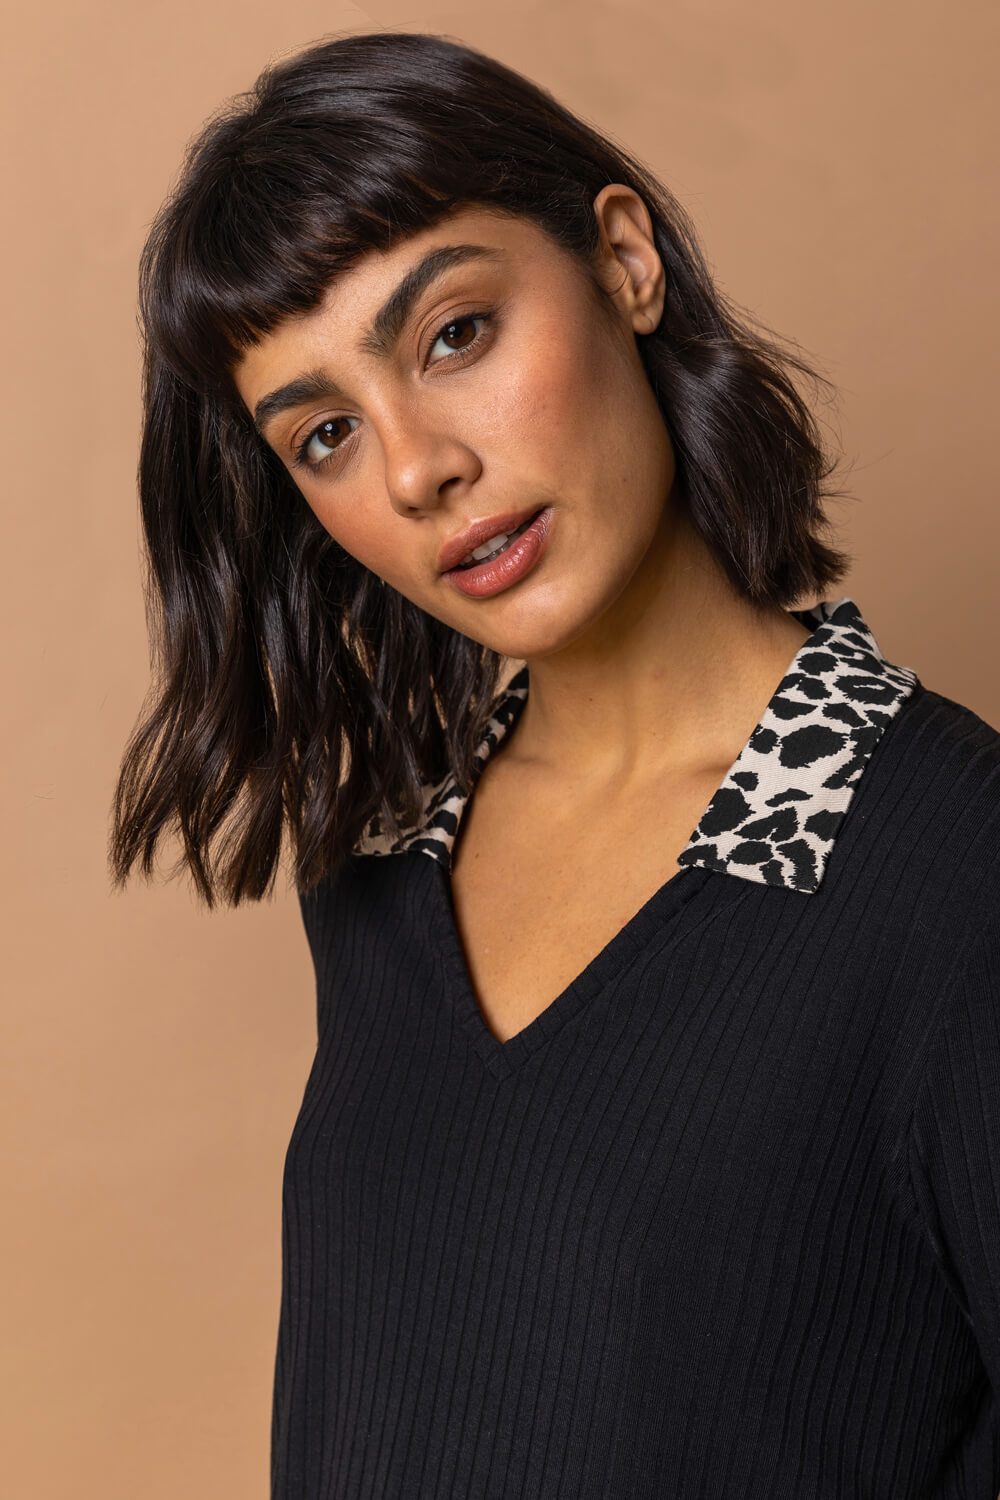 Black Leopard Print Collar Ribbed Long Sleeve Top, Image 4 of 5